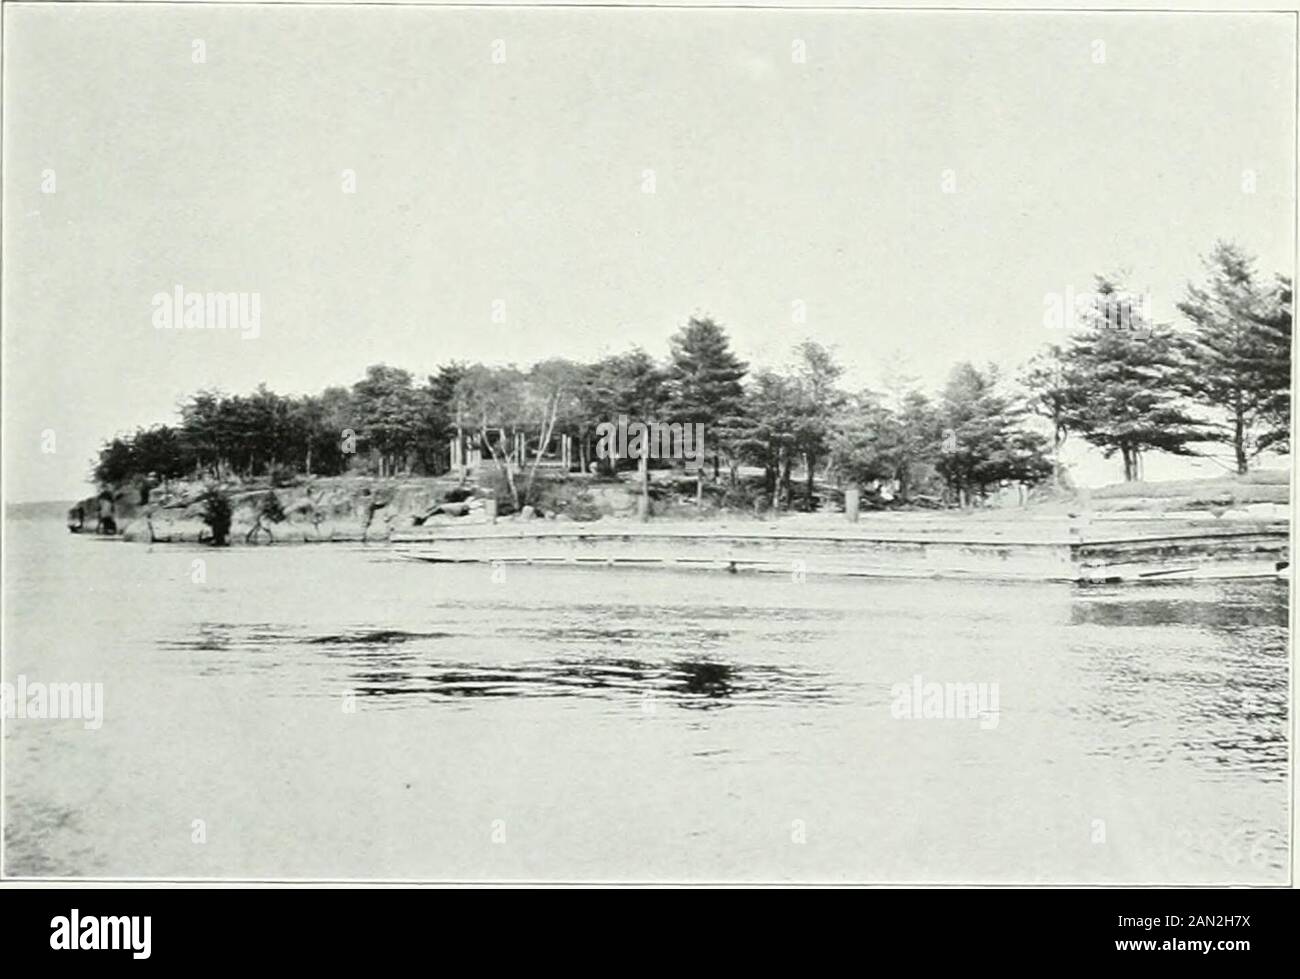 Sessional papers of the Dominion of Canada 1911-1912 . Pavilion ou Gordon Island, near Gananoque, Ont. St. Lawrence Island Parks. Photo F. H. B.. Wharf and Pavilion, Stovin Island, near Brockville, Ont. St. Lawrence Island Parks. Photo bv F. H. B. Stock Photo